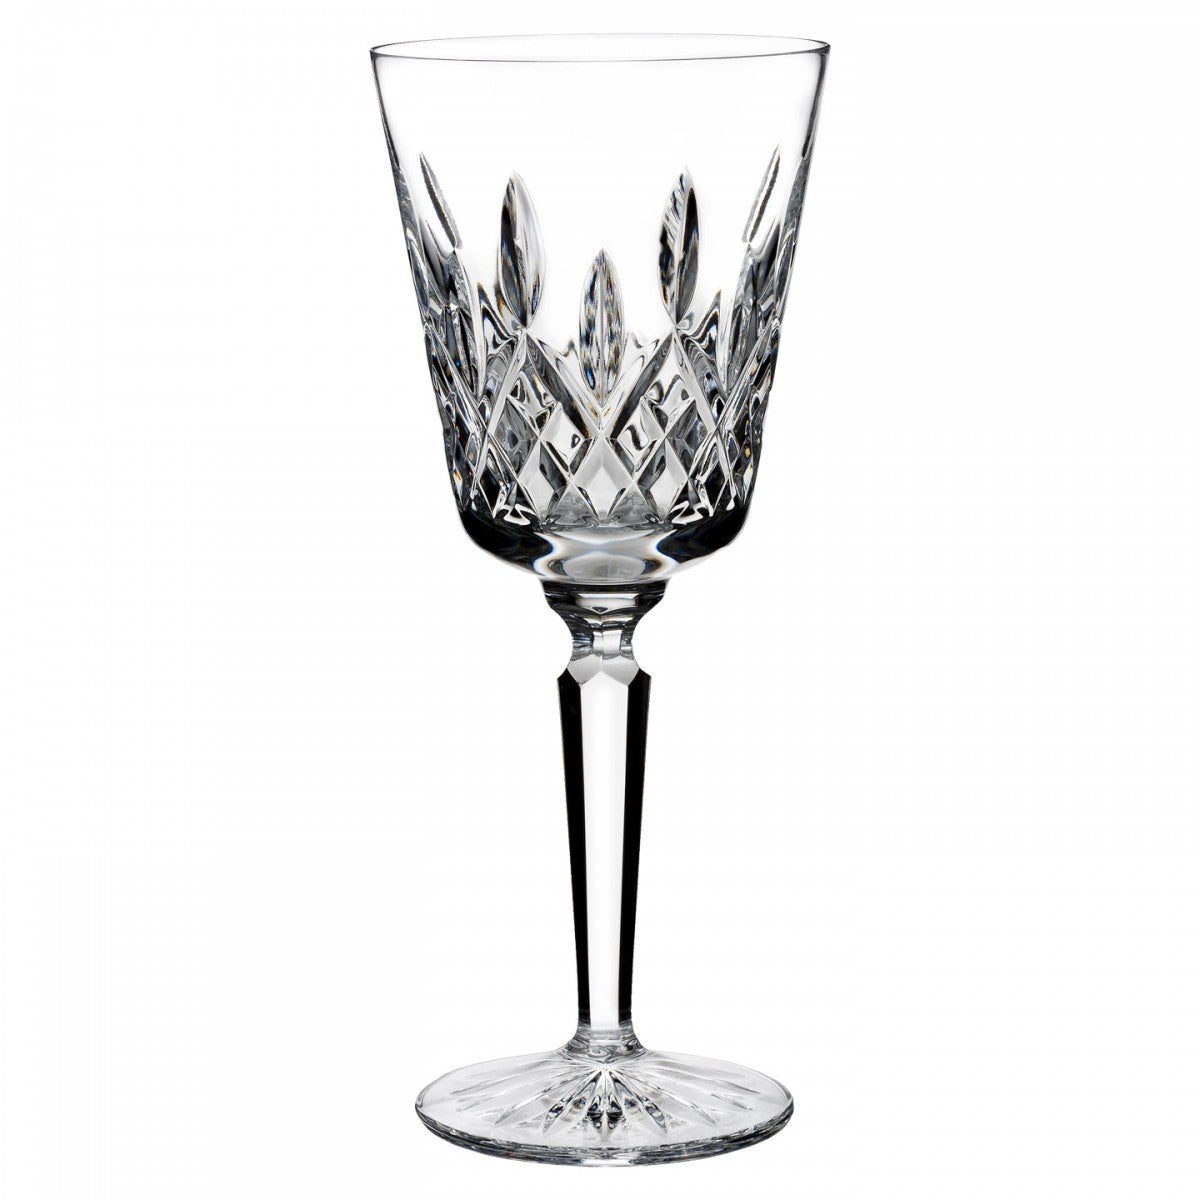 Waterford Lismore Tall Red Wine/Goblet, 8 oz